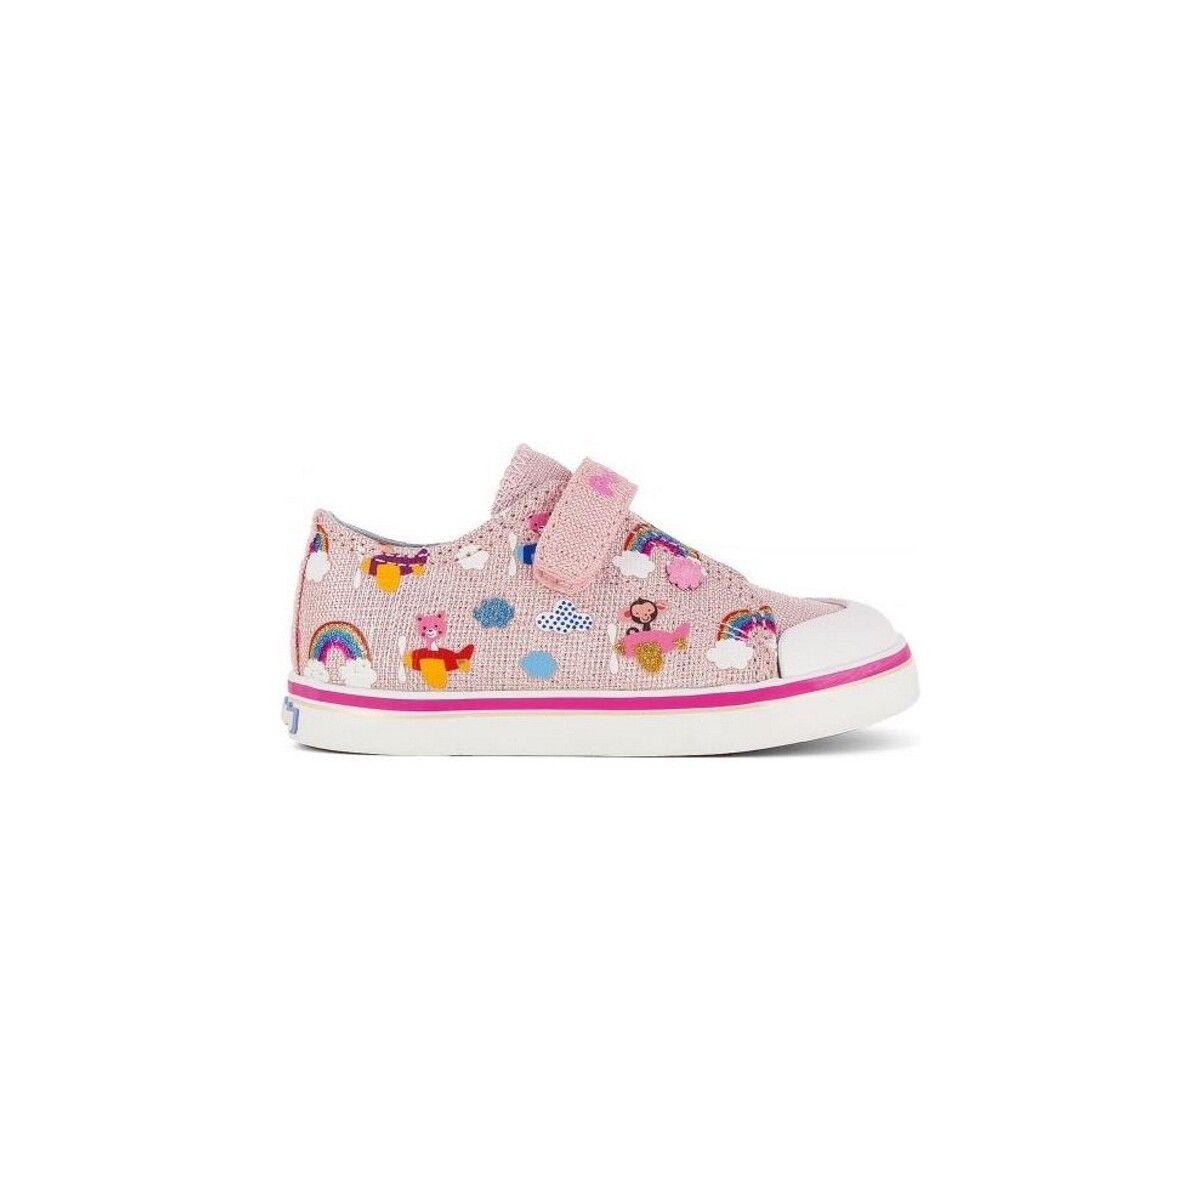 Pablosky  Sneakers Pablosky Baby Sneakers 967370 B